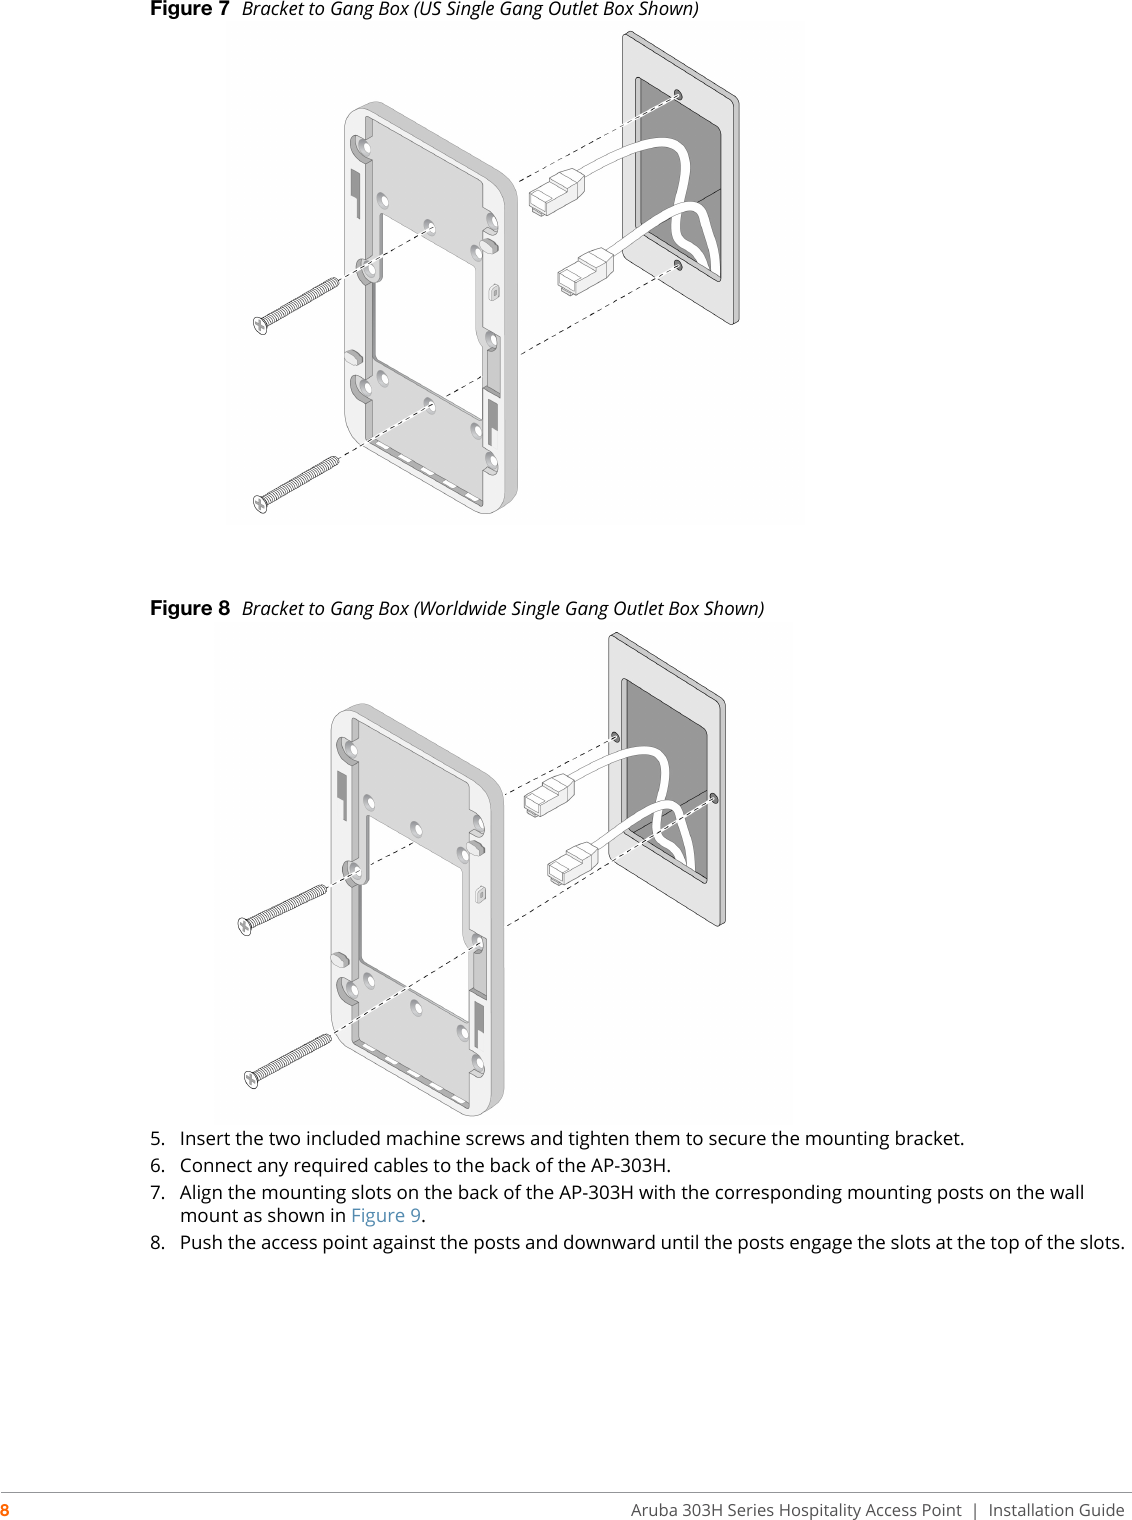 8Aruba 303H Series Hospitality Access Point  | Installation GuideFigure 7  Bracket to Gang Box (US Single Gang Outlet Box Shown)Figure 8  Bracket to Gang Box (Worldwide Single Gang Outlet Box Shown)5. Insert the two included machine screws and tighten them to secure the mounting bracket.6. Connect any required cables to the back of the AP-303H.7. Align the mounting slots on the back of the AP-303H with the corresponding mounting posts on the wall mount as shown in Figure 9.8. Push the access point against the posts and downward until the posts engage the slots at the top of the slots.